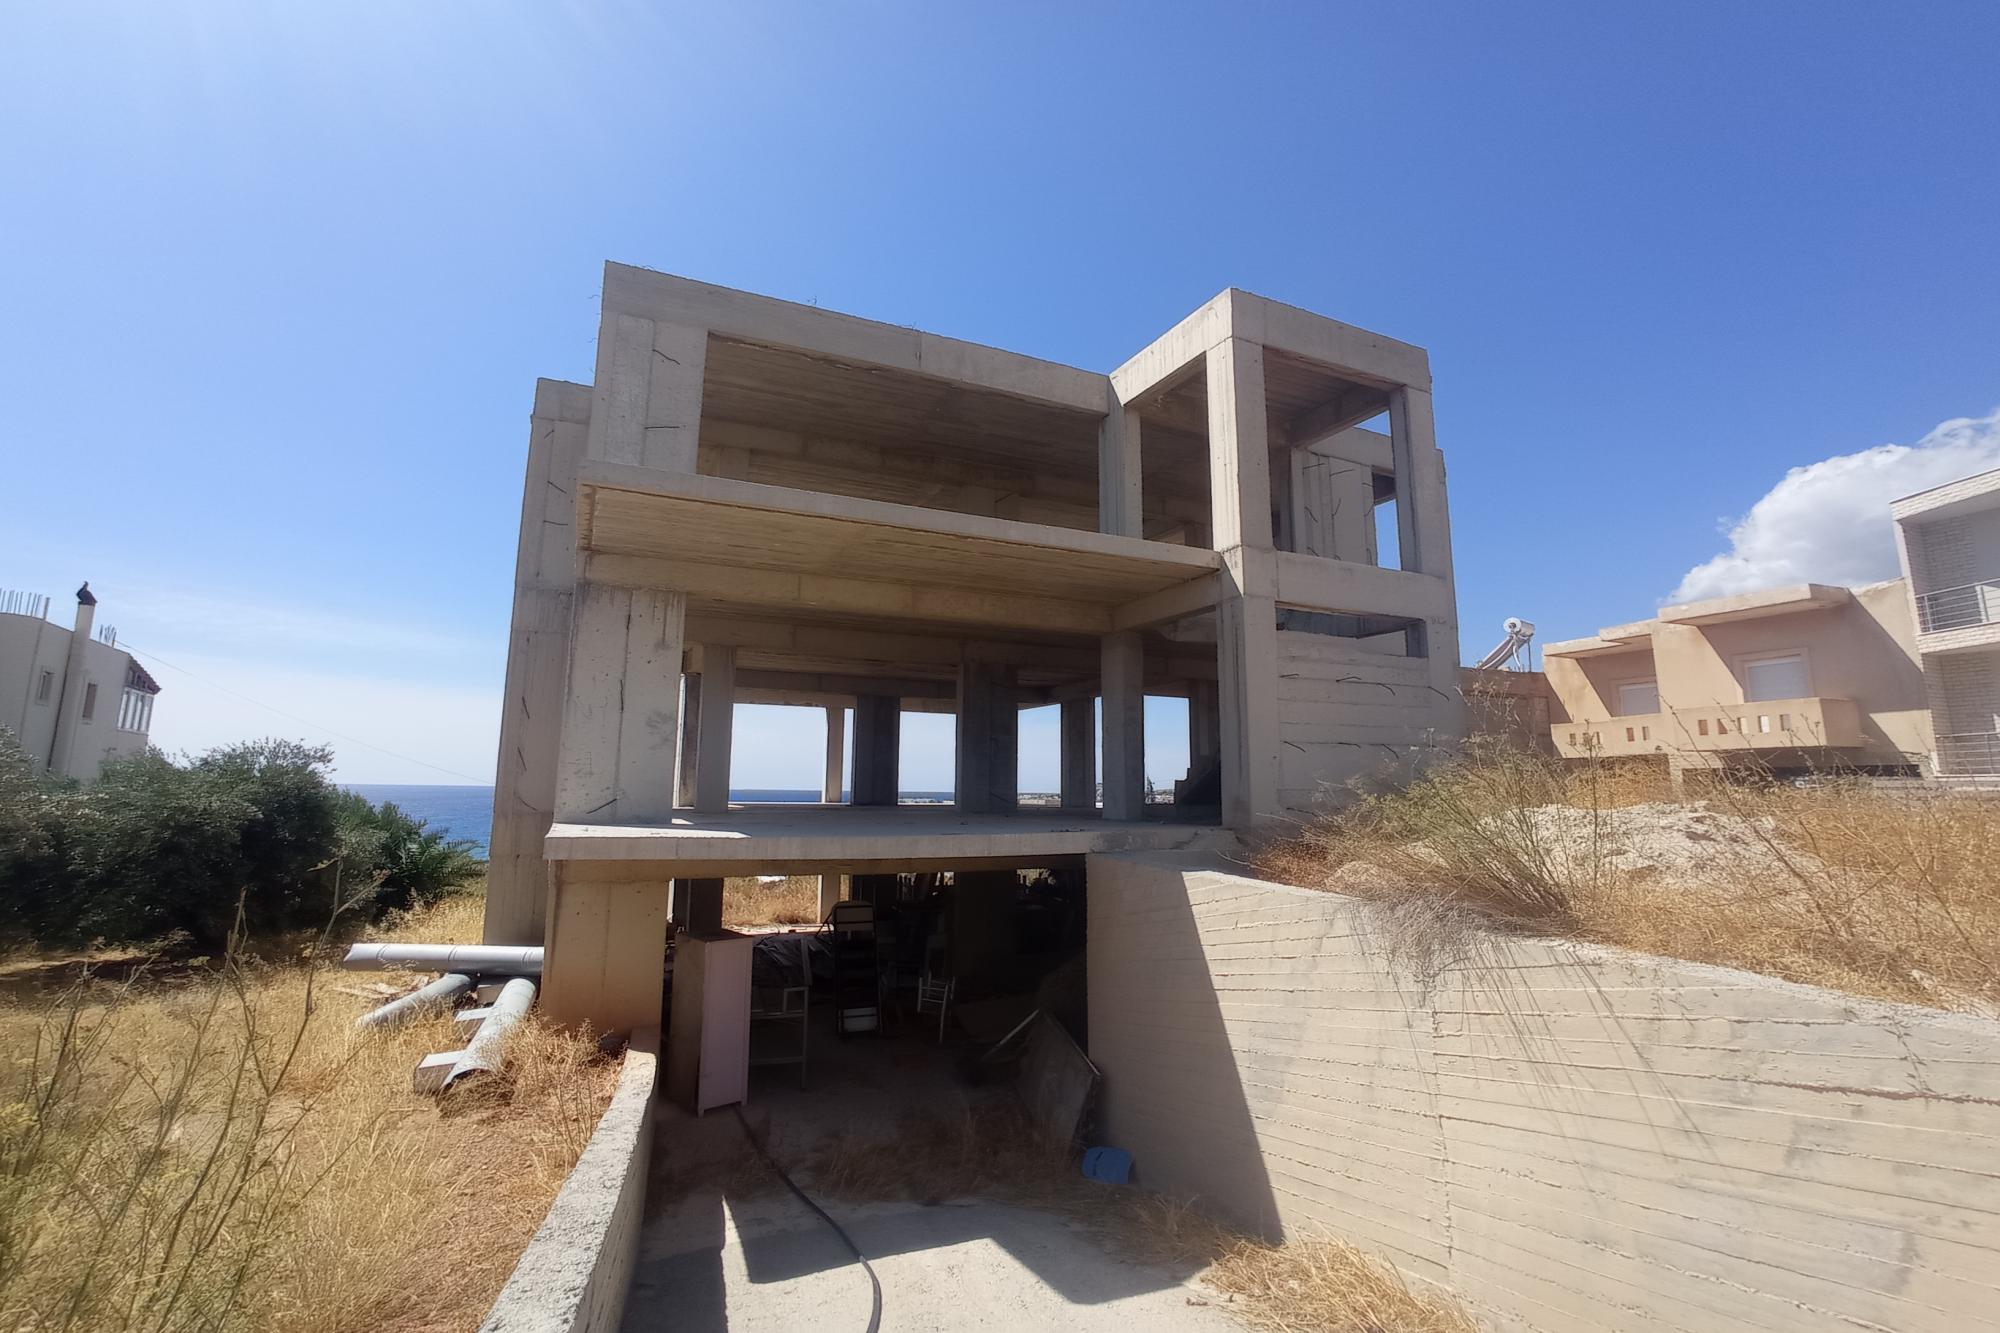 Detached unfinished house/skeleton with amazing sea views in lovely resort.